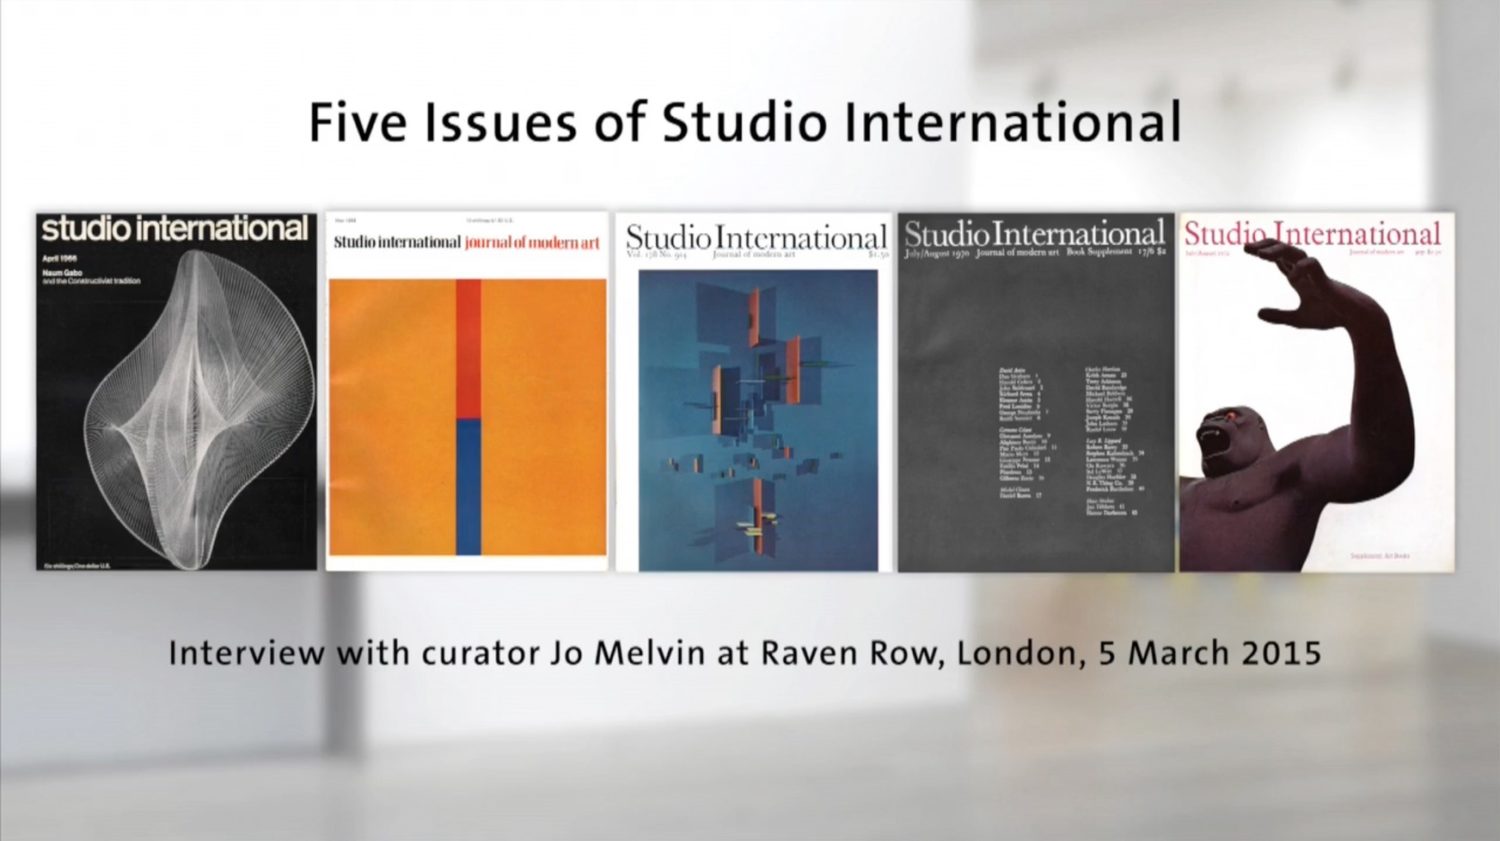 Interview with Jo Melvin, curator of Five Issues of Studio International, at Raven Row, London